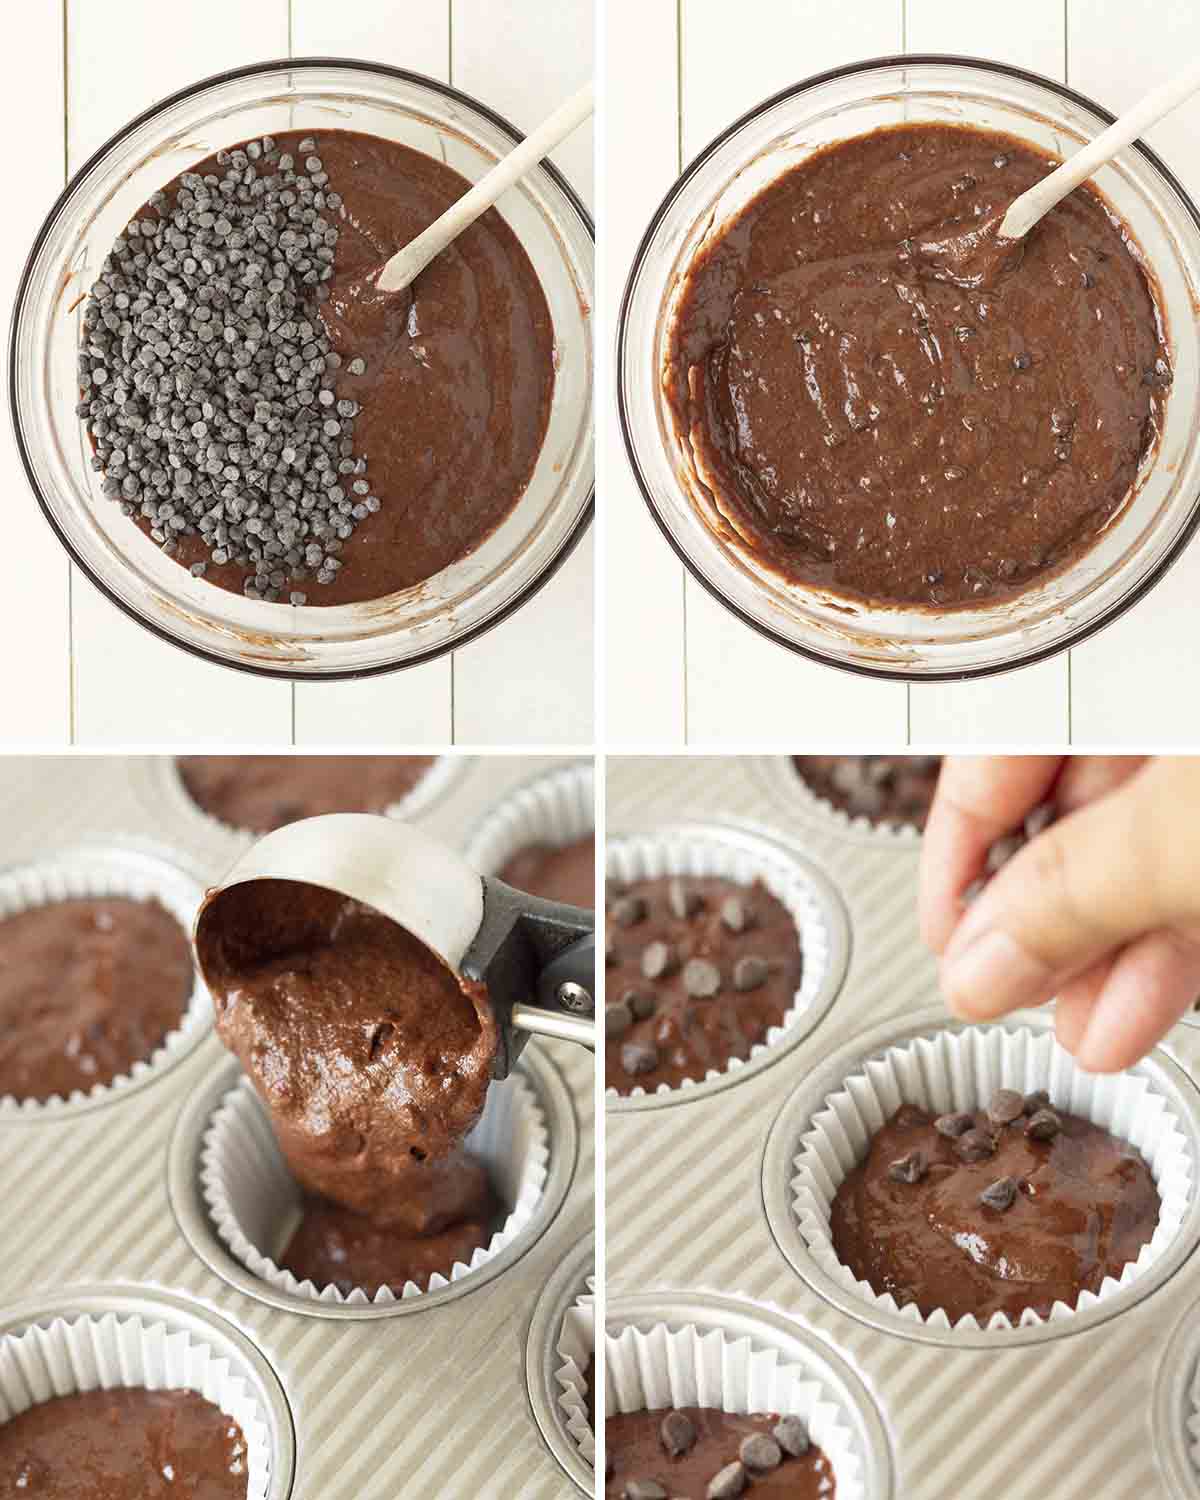 A collage of four images showing the sequence of steps to make the chocolate banana muffins.